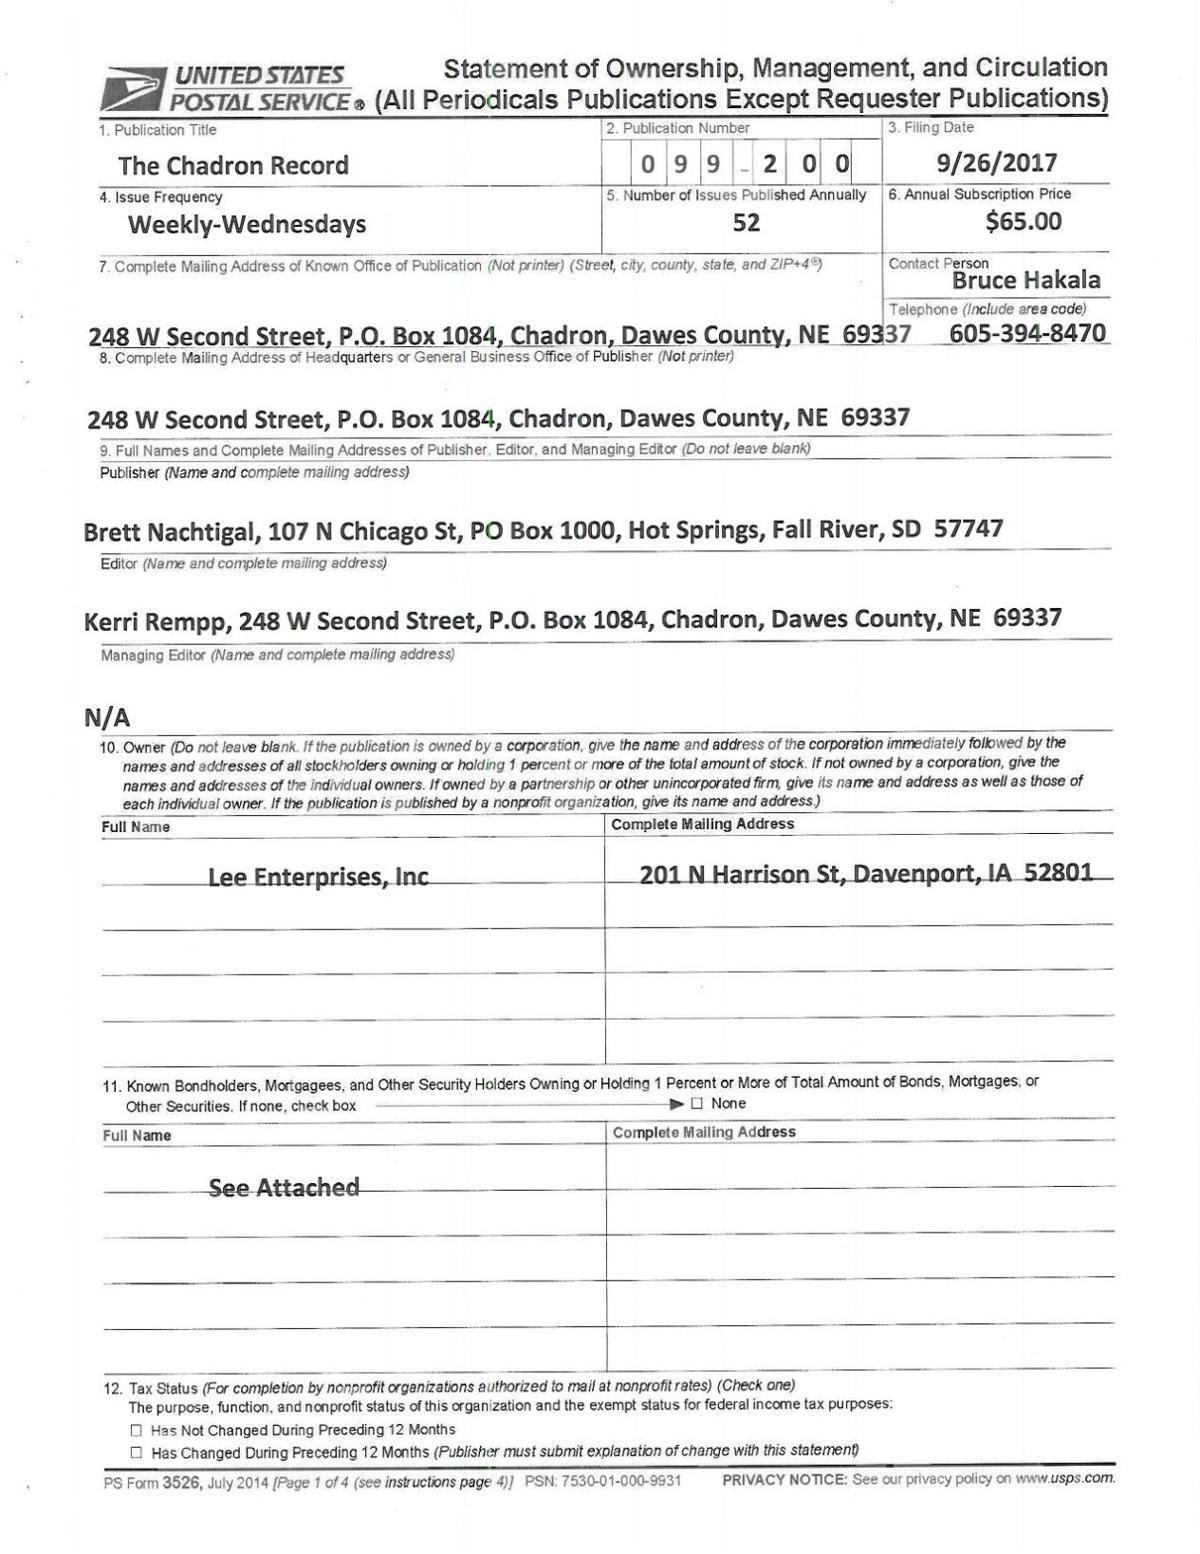 Statement Of Ownership Form Fill Out And Sign Printab - vrogue.co